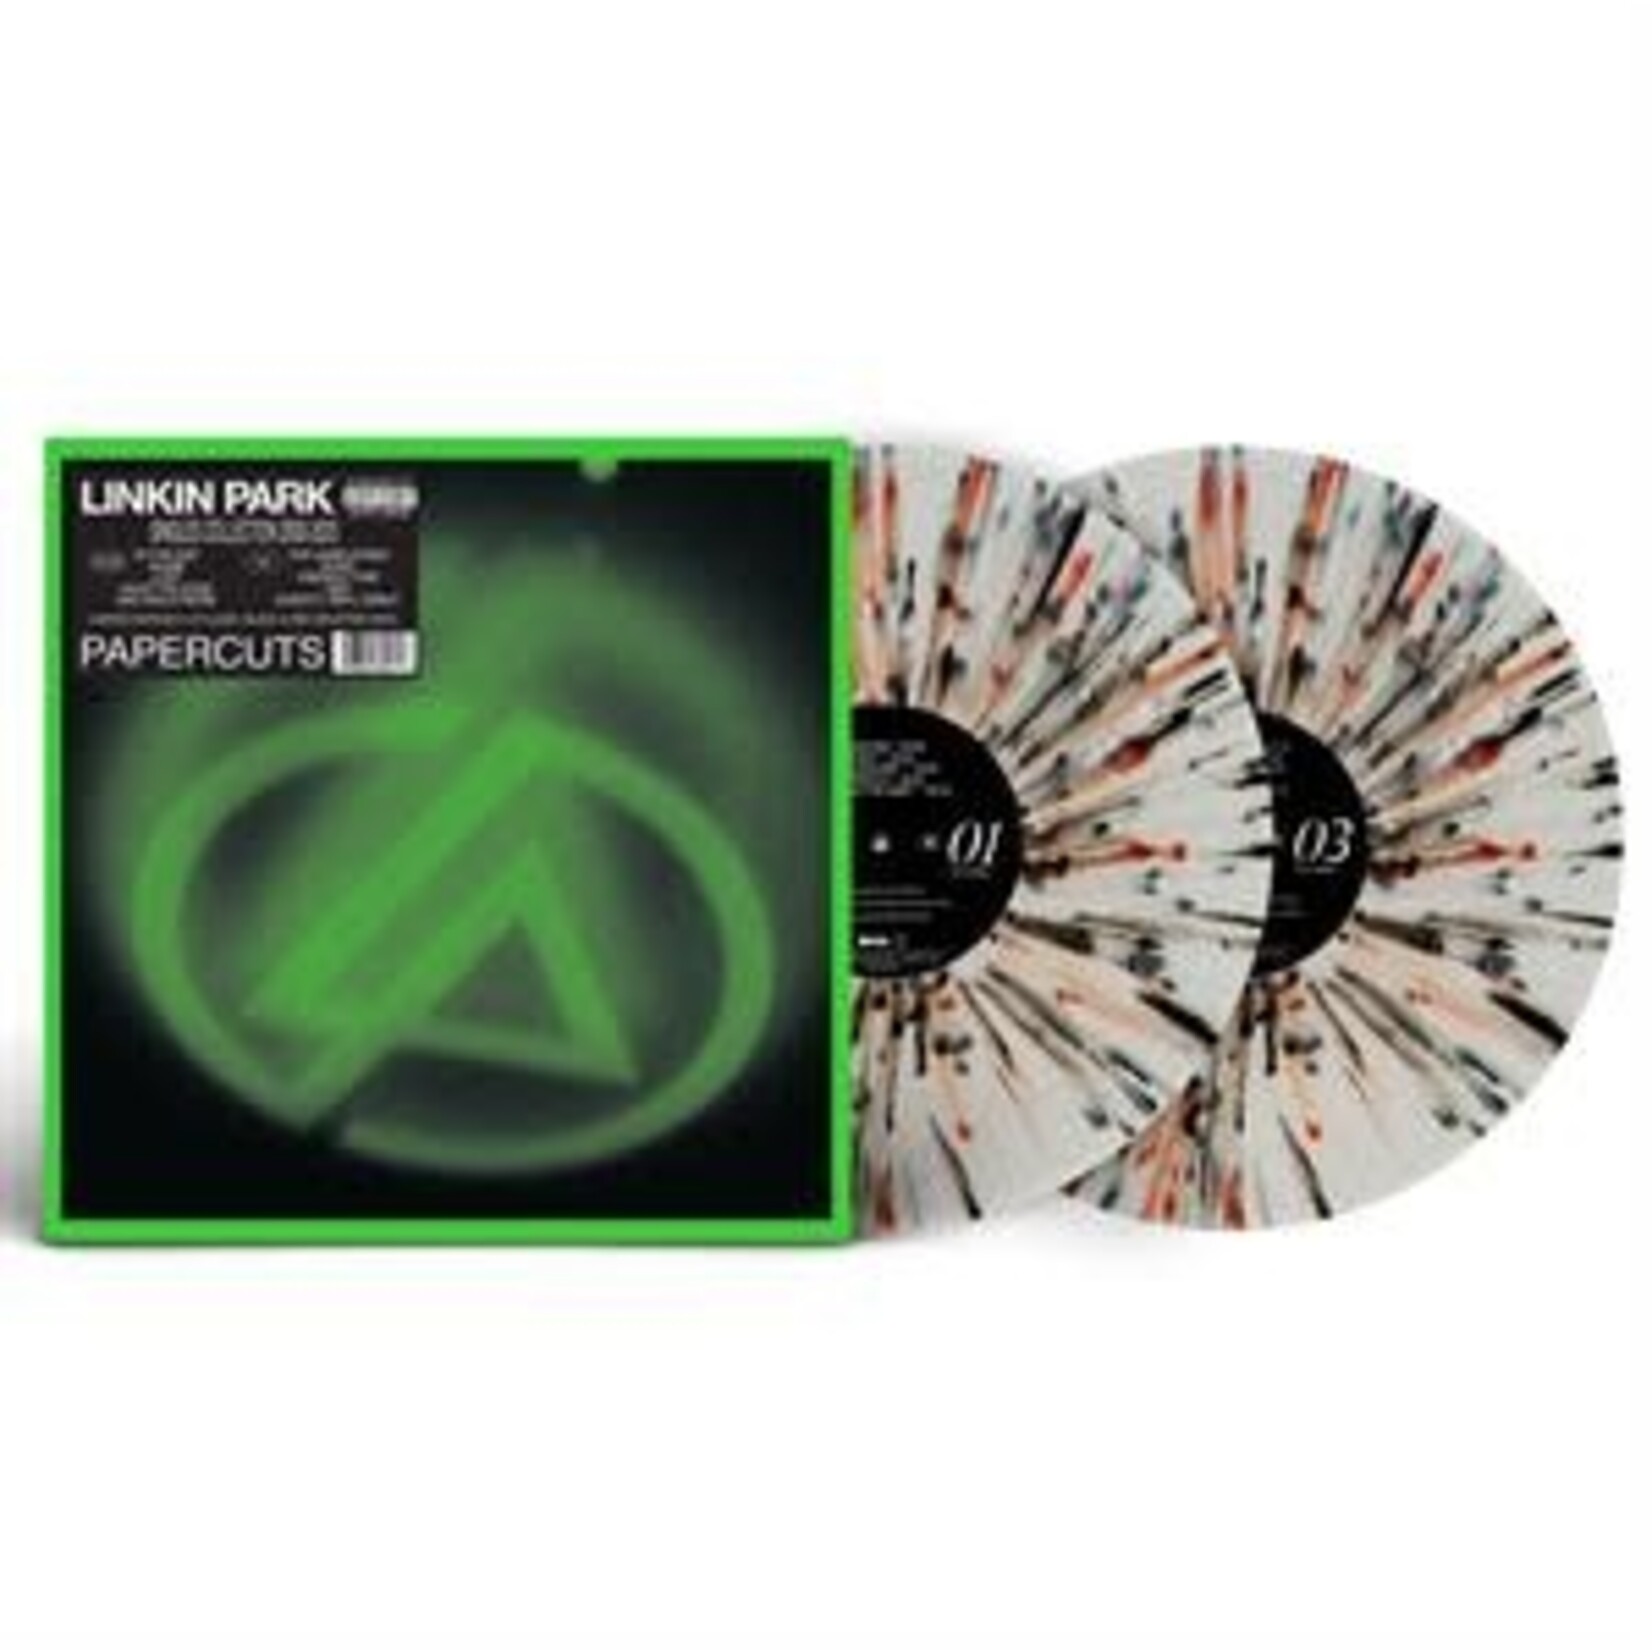 LINKIN PARK - PAPERCUTS PAPERCUTS (SINGLES COLLECTION 2000-2023)  2LP Gatefold Sleeve, Insert, Limited Edition